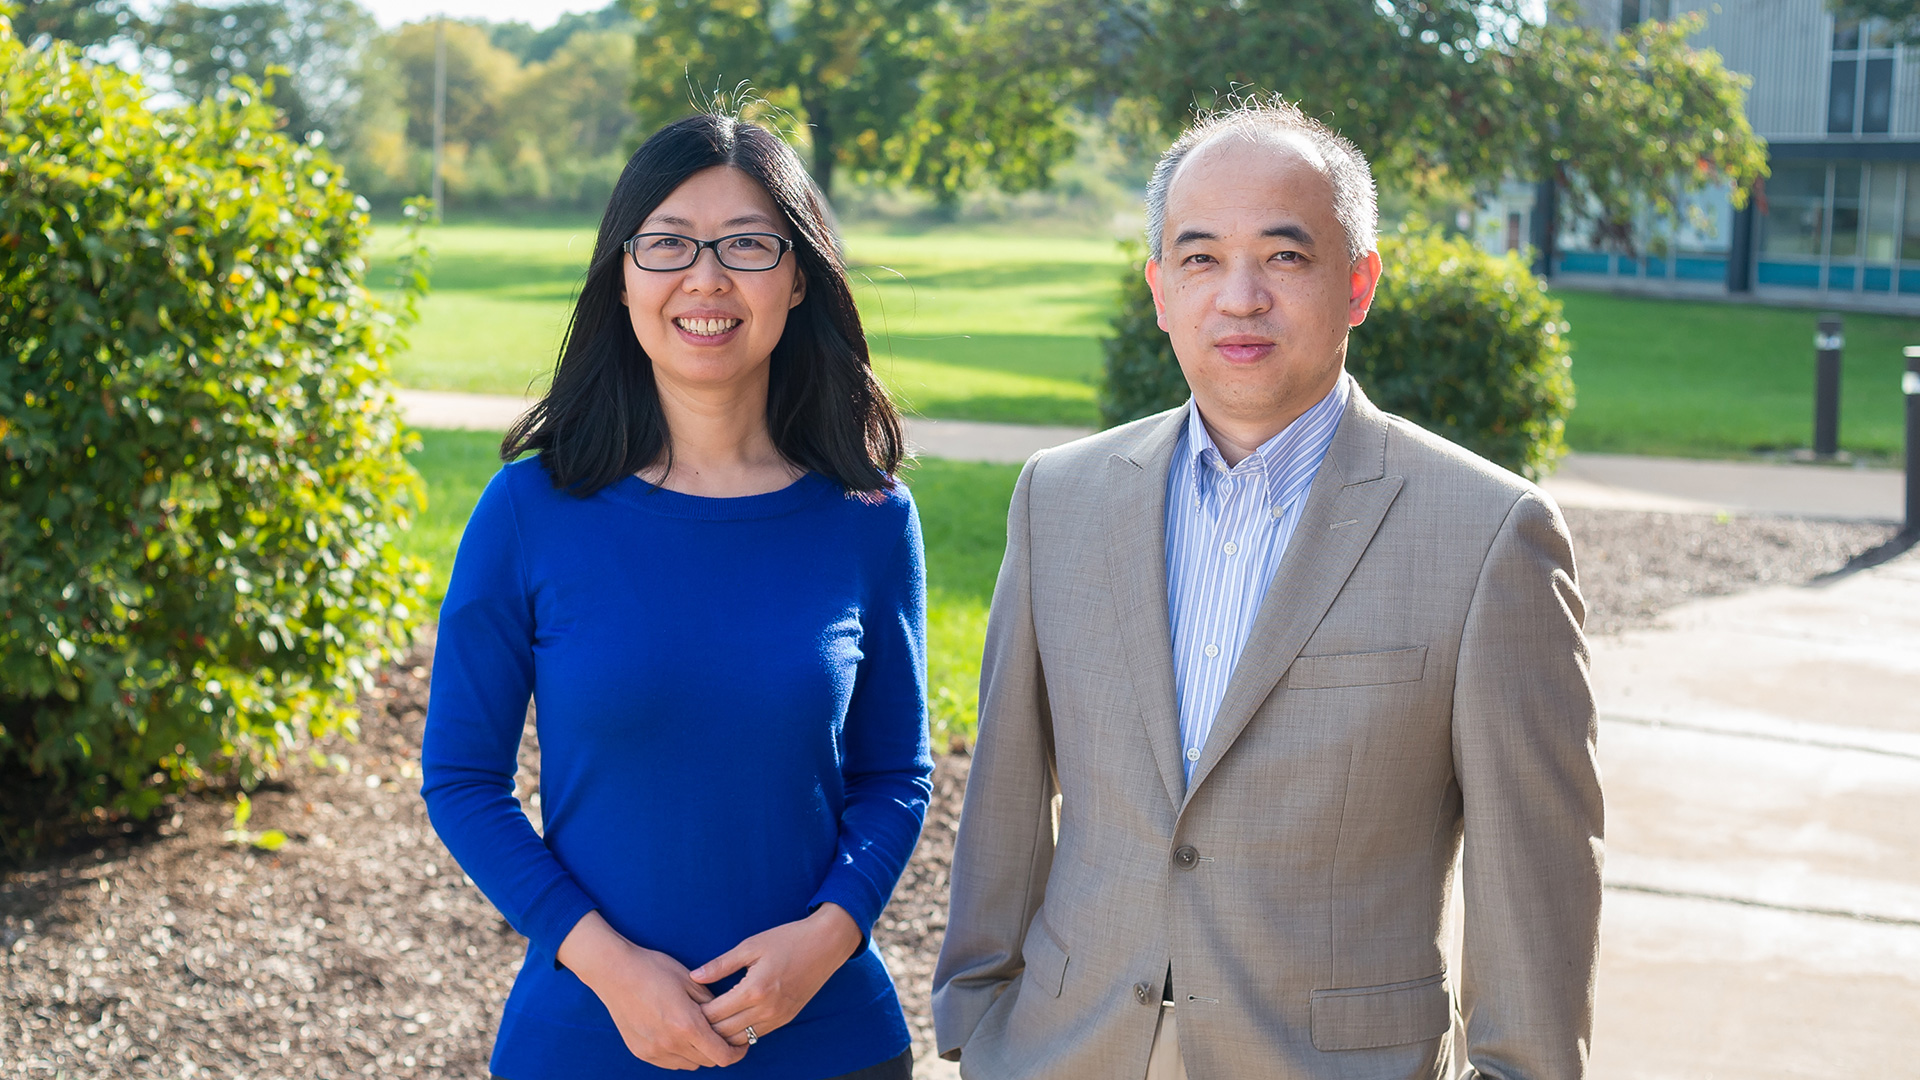 (From left) Yuepeng Zhang  and Kaizhong Gao  of the HyMag Magnets team. (Image by Argonne National Laboratory.)